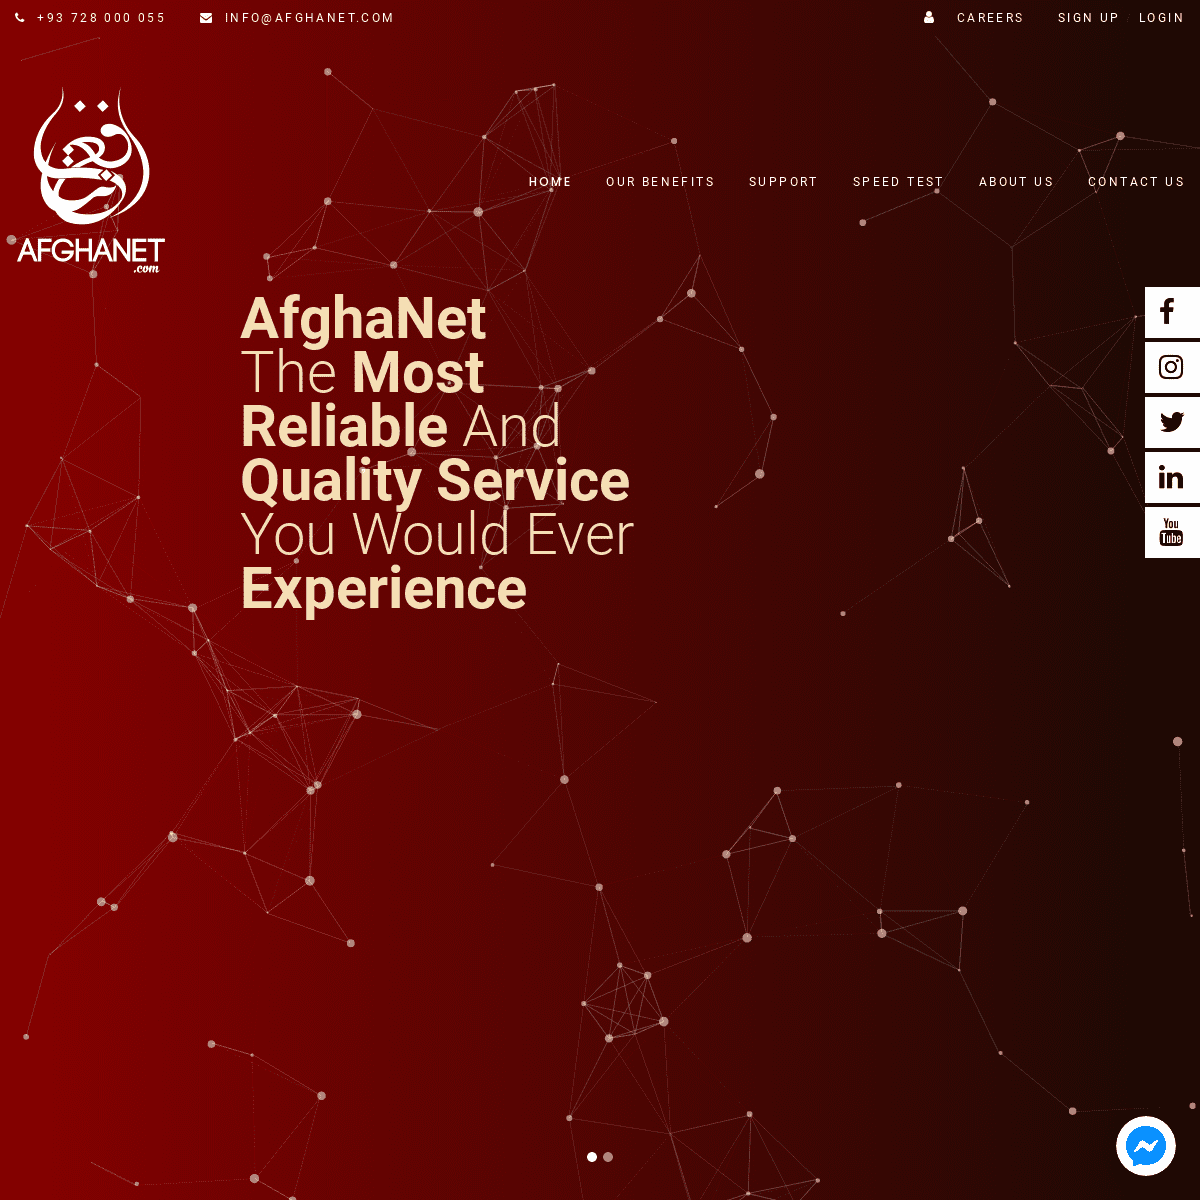 A complete backup of afghanet.com